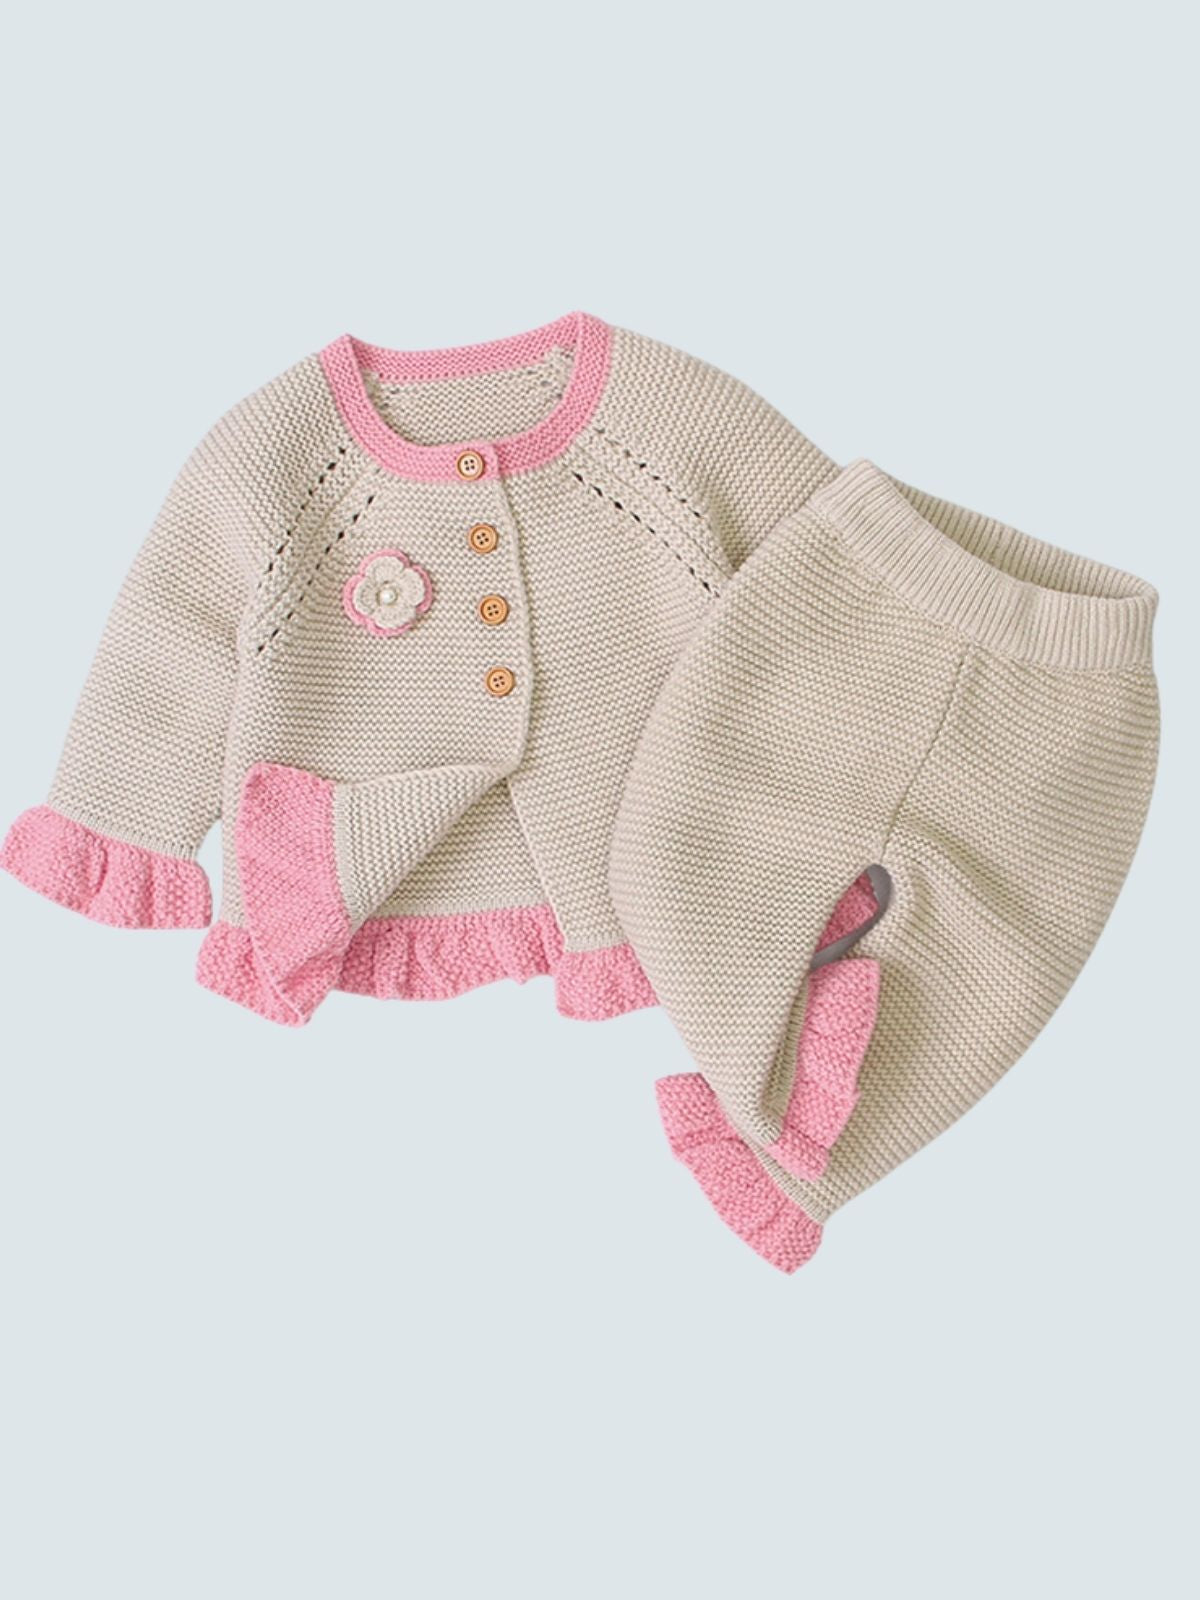 Baby "You're the Knit Girl" Ruffle Long Sleeve Sweater and Pants Set Beige